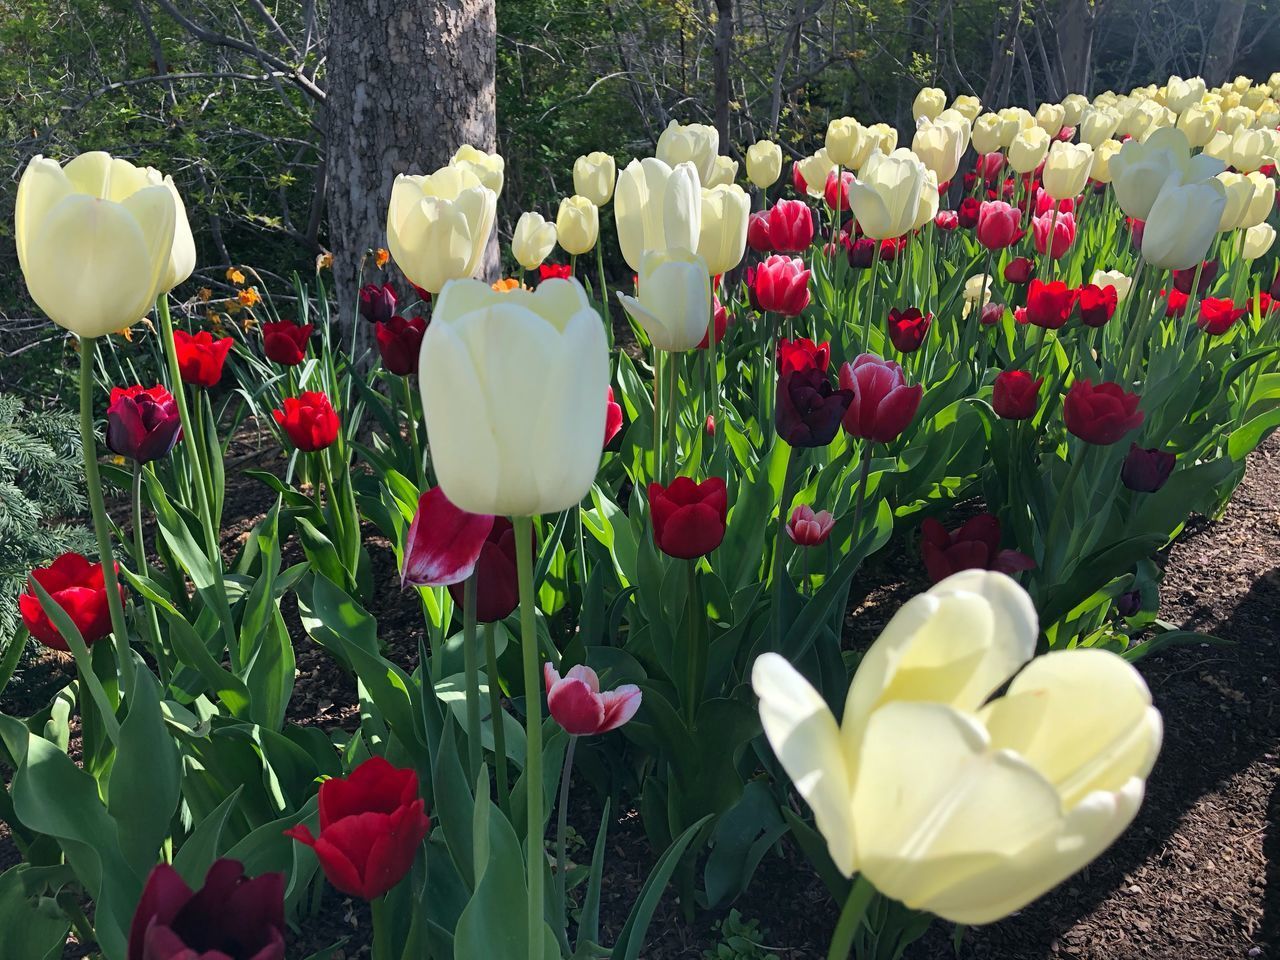 CLOSE-UP OF RED TULIPS WITH FLOWERS IN PARK